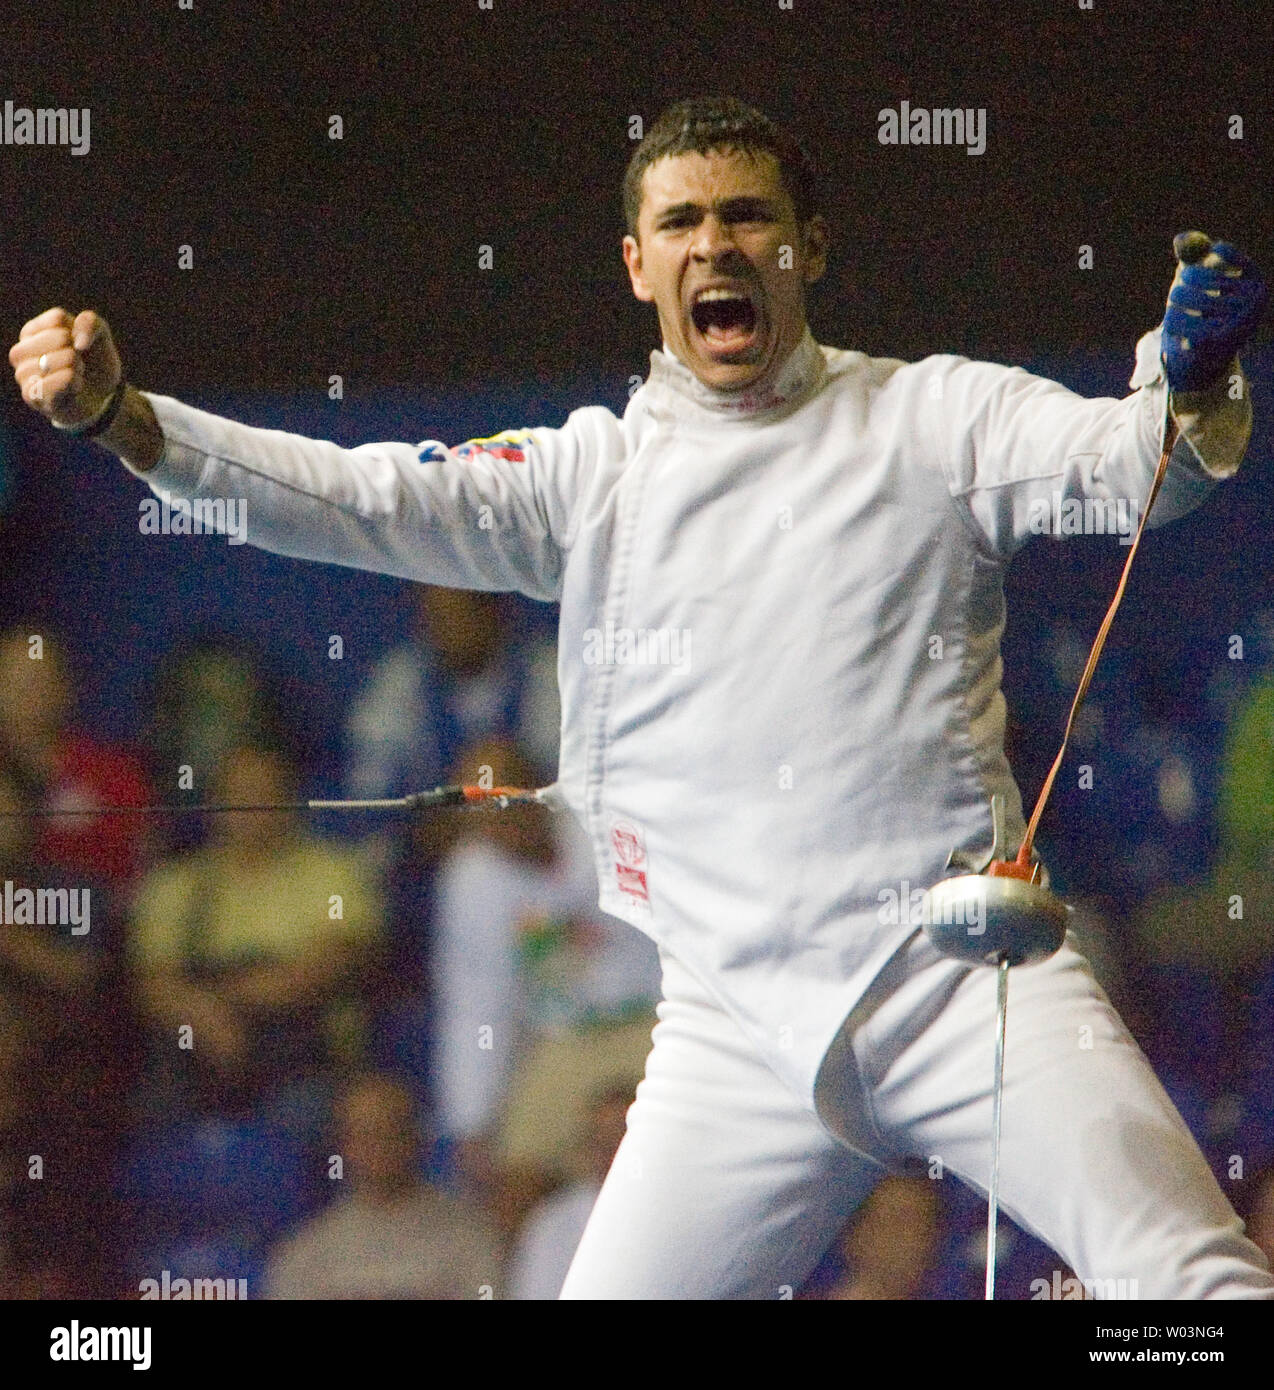 Venezuela's Reuben Limardo celebrates after beating Cuba's Andres Carrillo 11-10 in overtime, winning gold in men's individual epee at Riocentro during the 2007 Pan Am Games in Rio de Janeiro, Brazil on July 16, 2007.   (UPI Photo/Heinz Ruckemann) Stock Photo